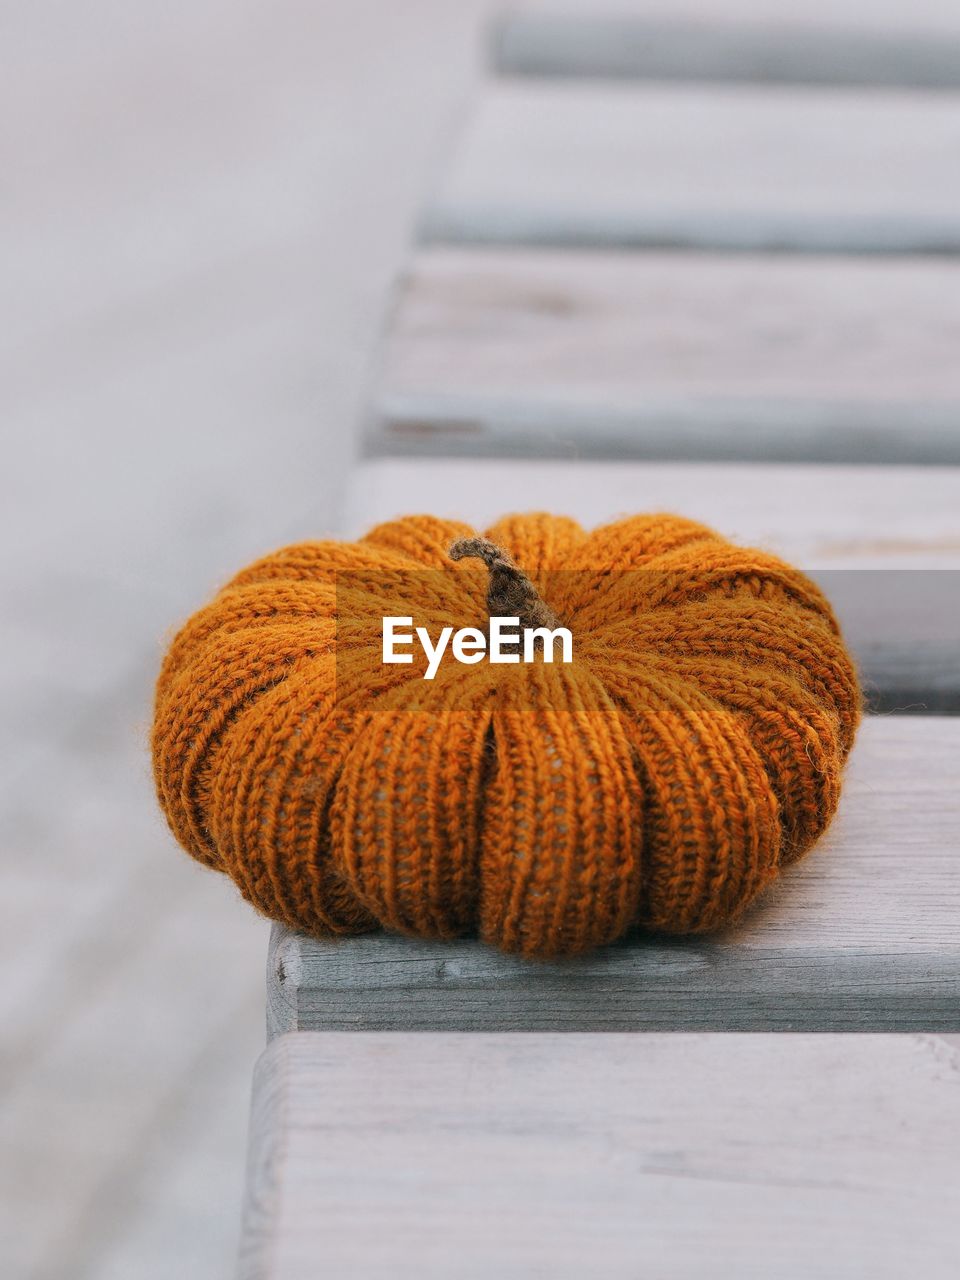 Knitted orange pumpkin on a wooden table.